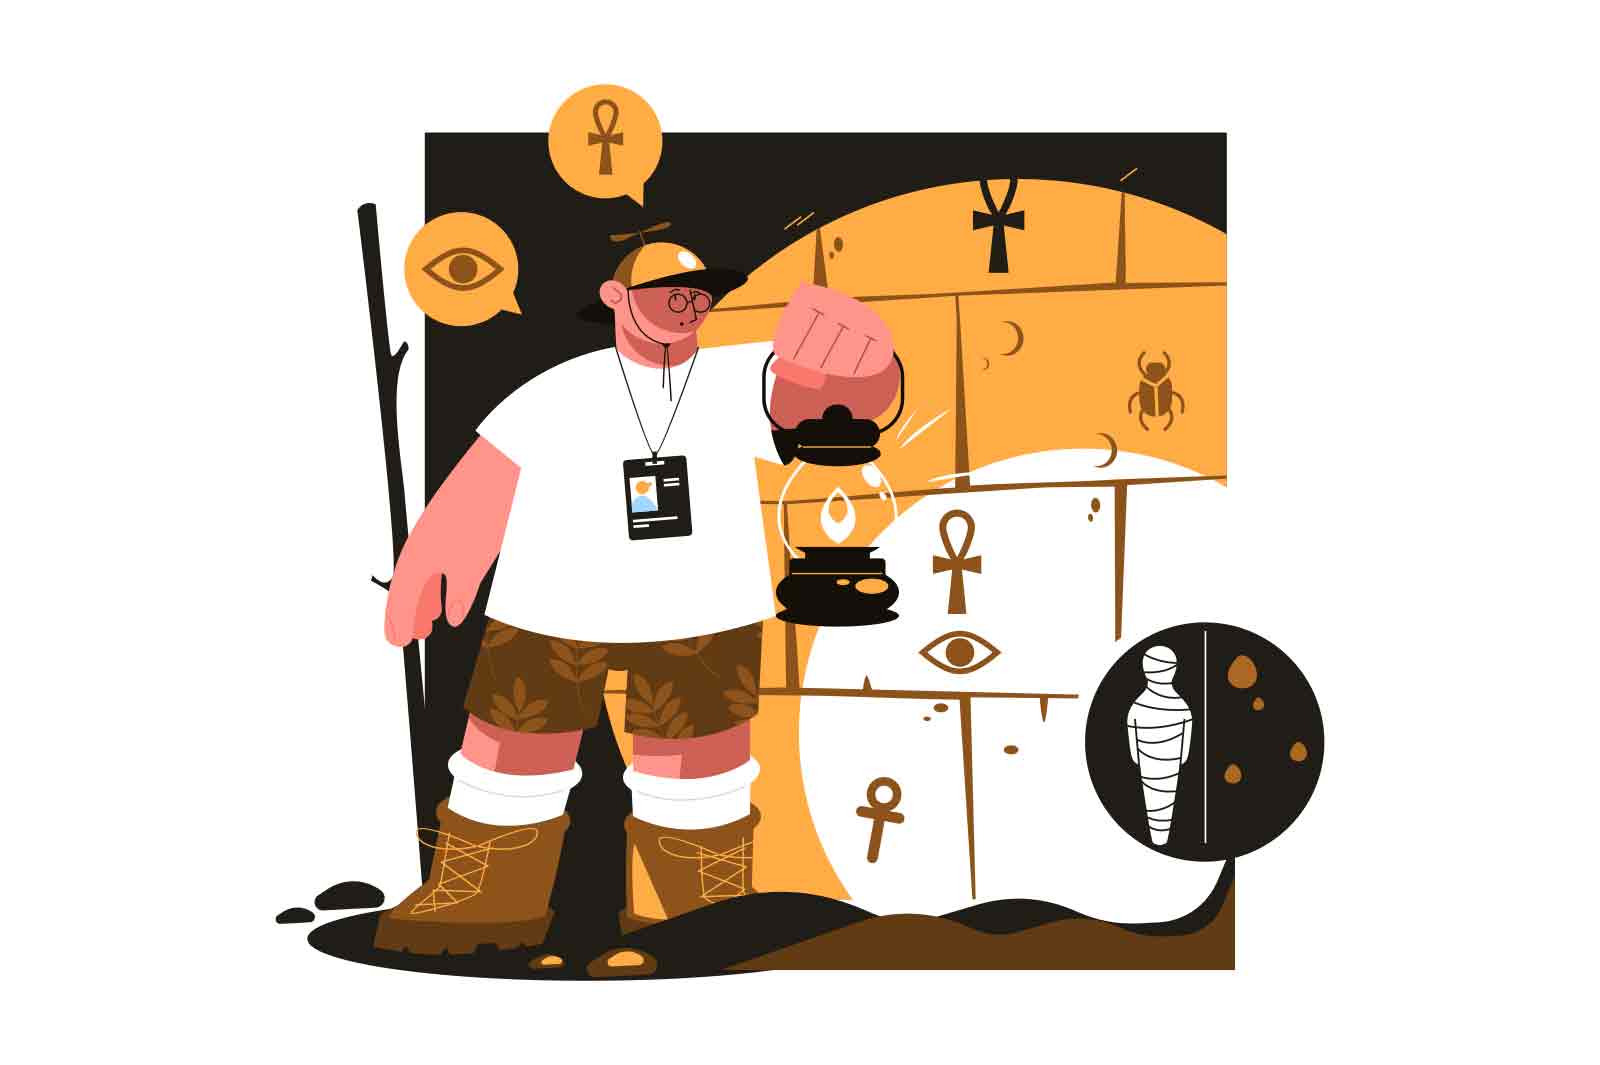 Guy in ancient tomb or sepulcher with treasures vector illustration. Man with lamp finding hidden treasures in dungeon crawler flat concept